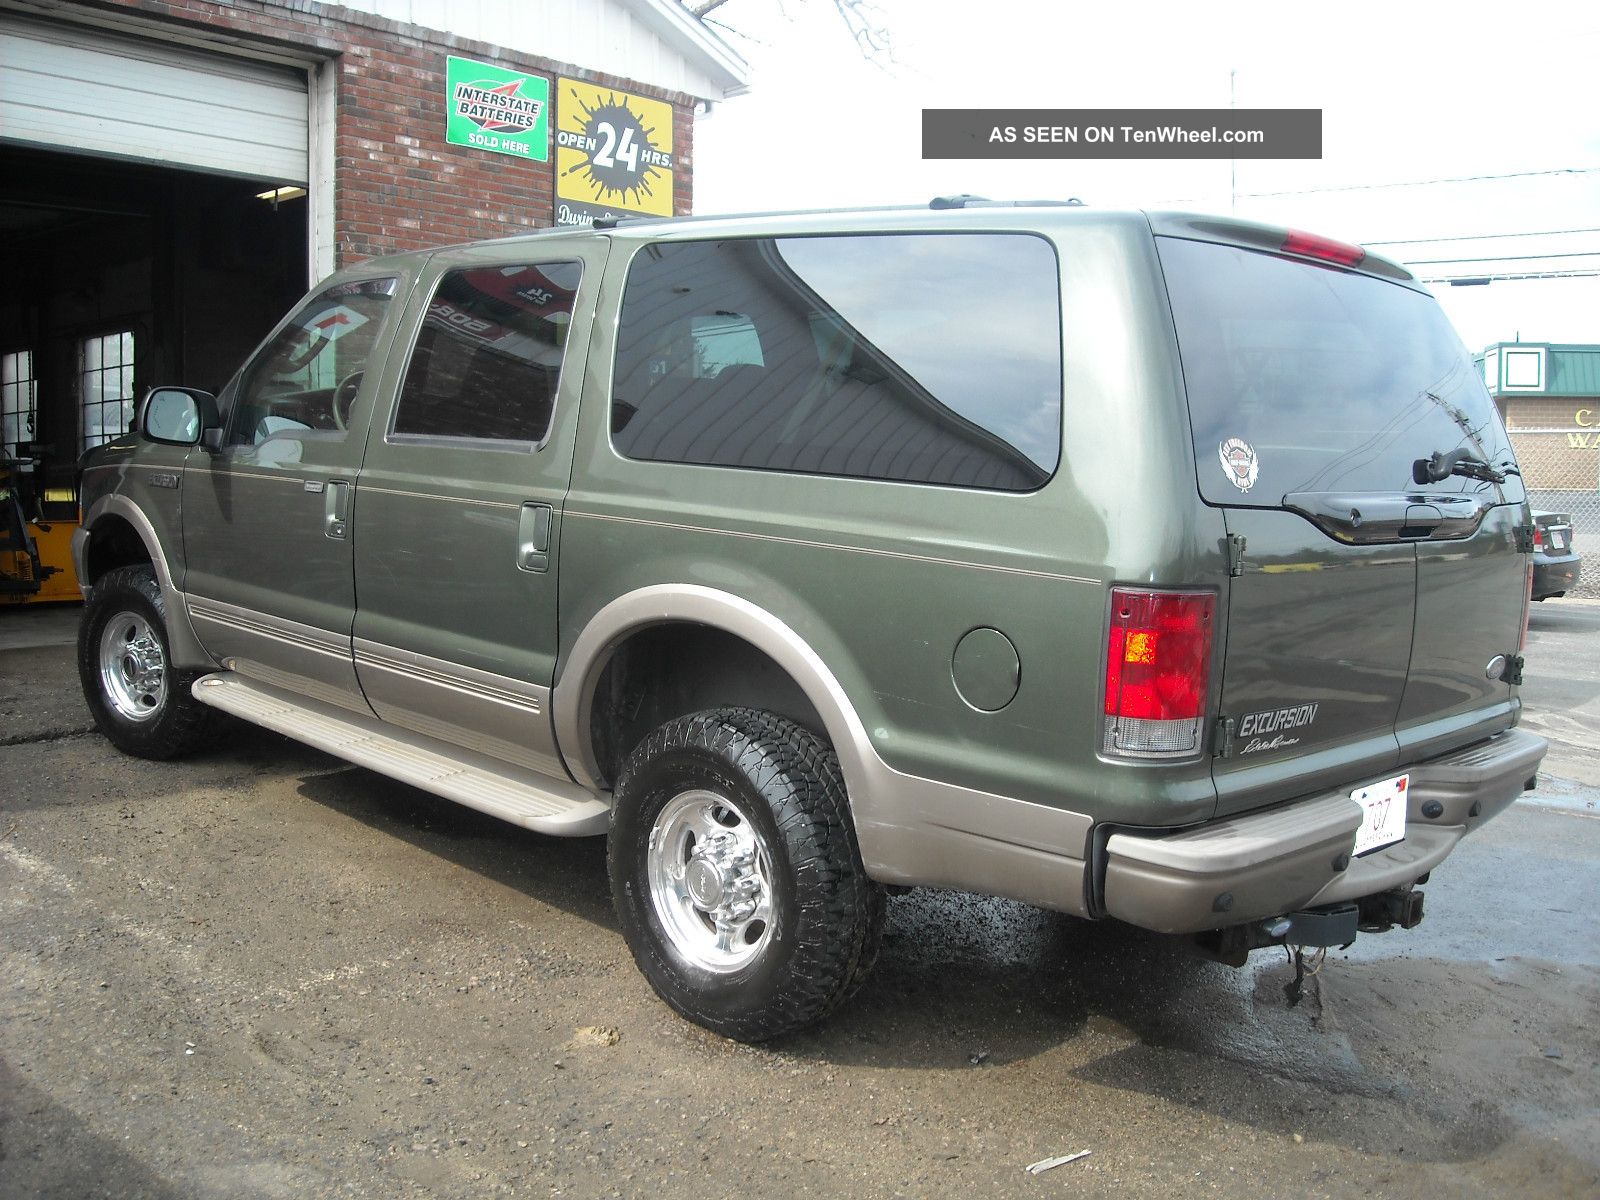 2003 Ford explorer eddie bauer edition owners manual #3